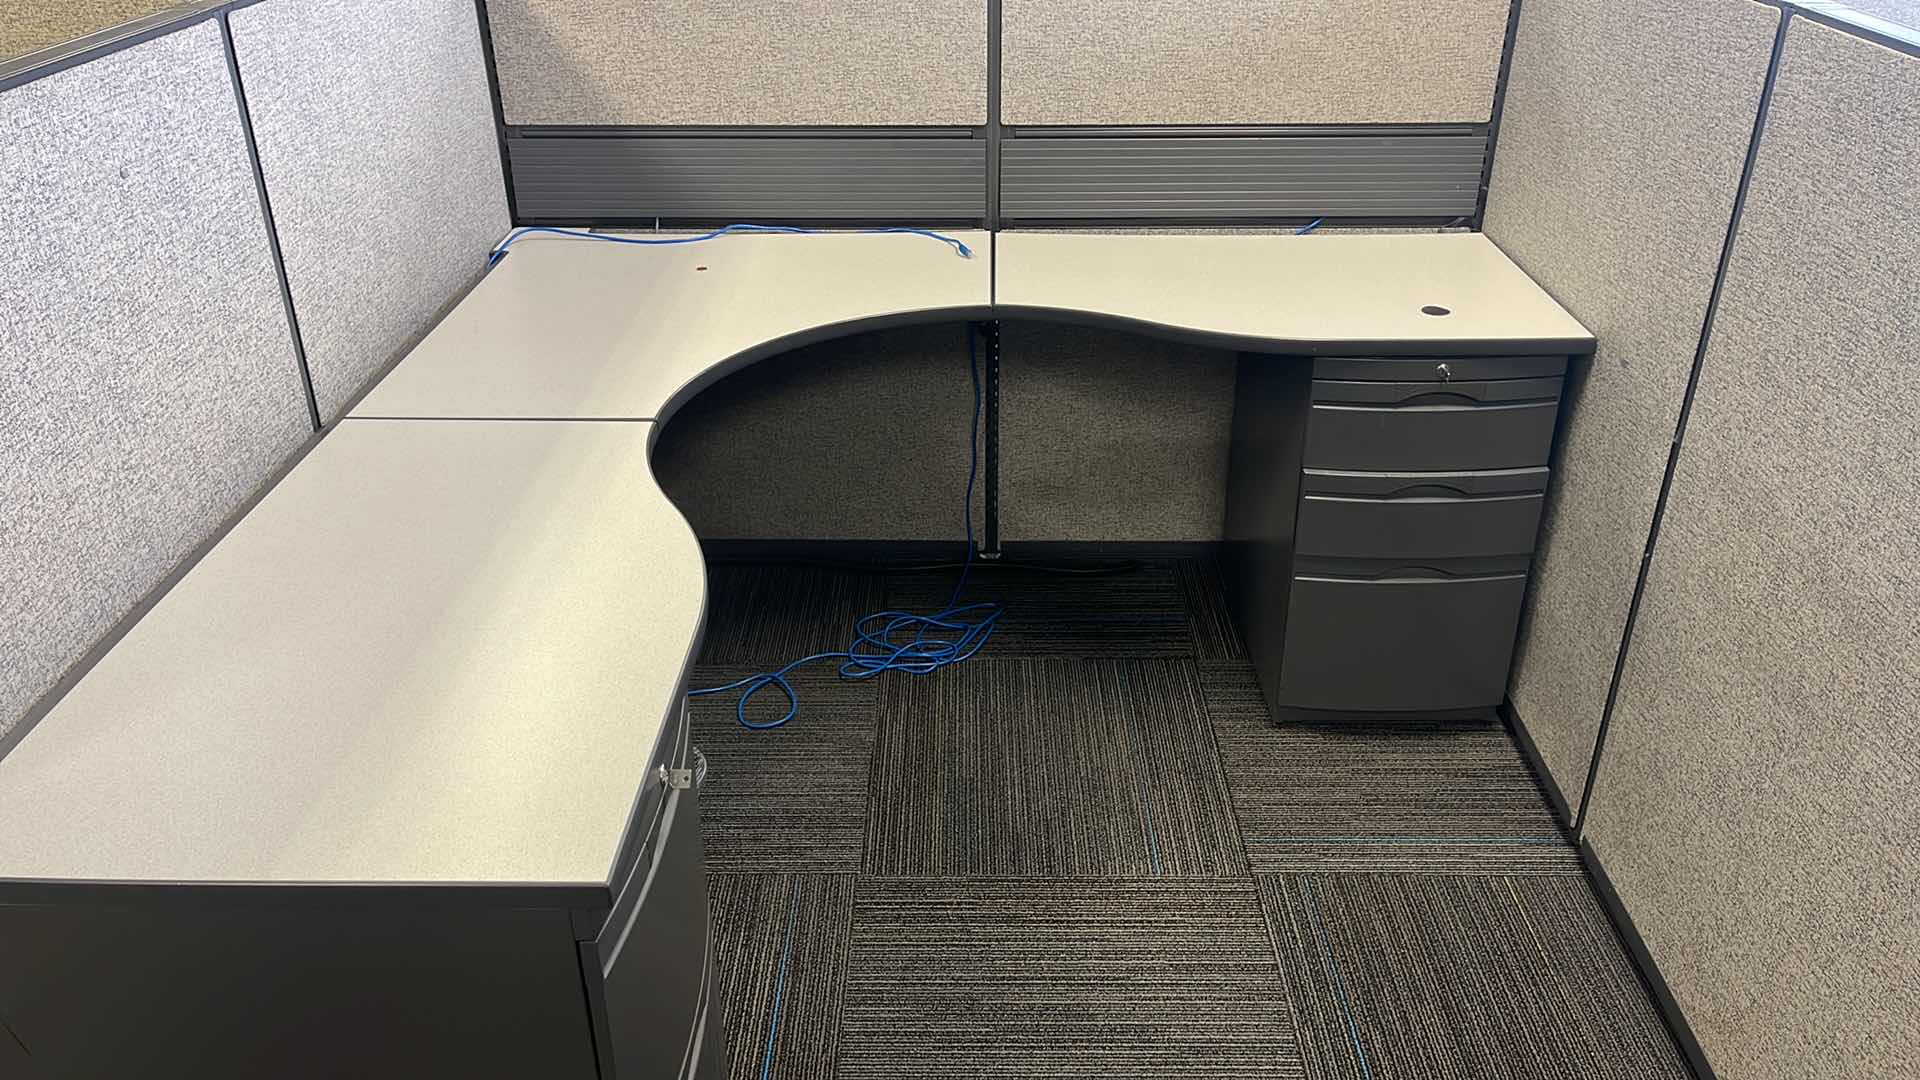 Photo 6 of 6 PC CUBICAL SET W 5 DRAWER MEDAL BASE DESKS 76” X 76” H50” (BUYER TO DISASSEMBLE & REMOVE FROM 2ND STORY OFFICE BUILDING W ELEVATOR)